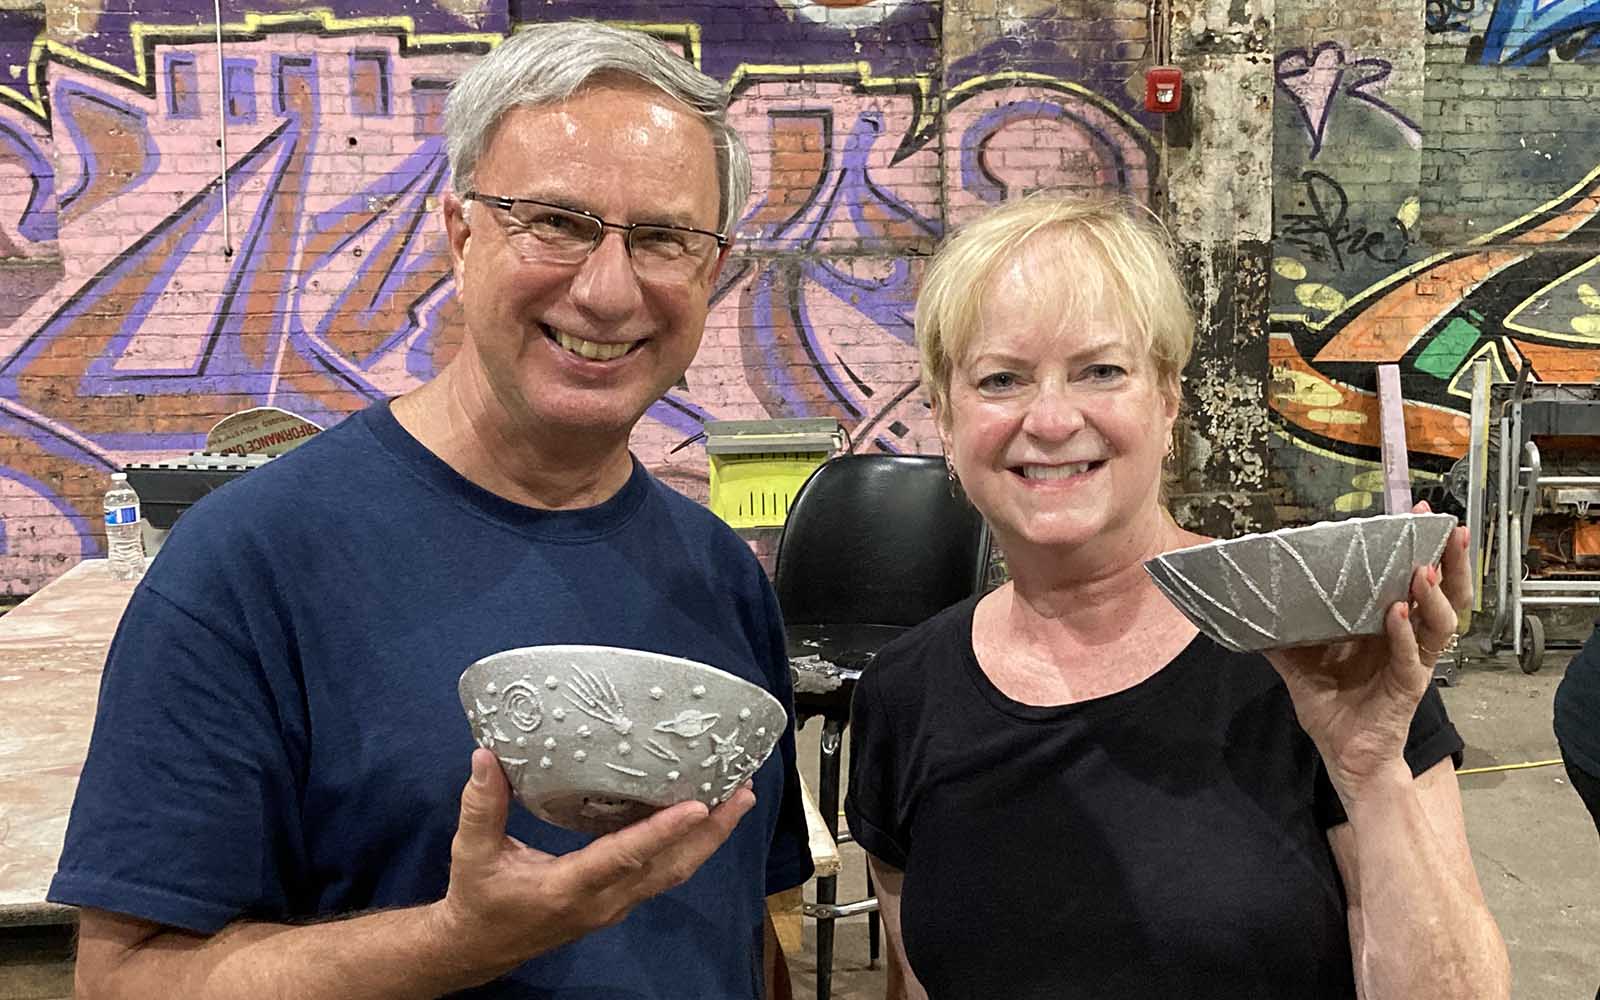 a couple display their crafted aluminum bowls